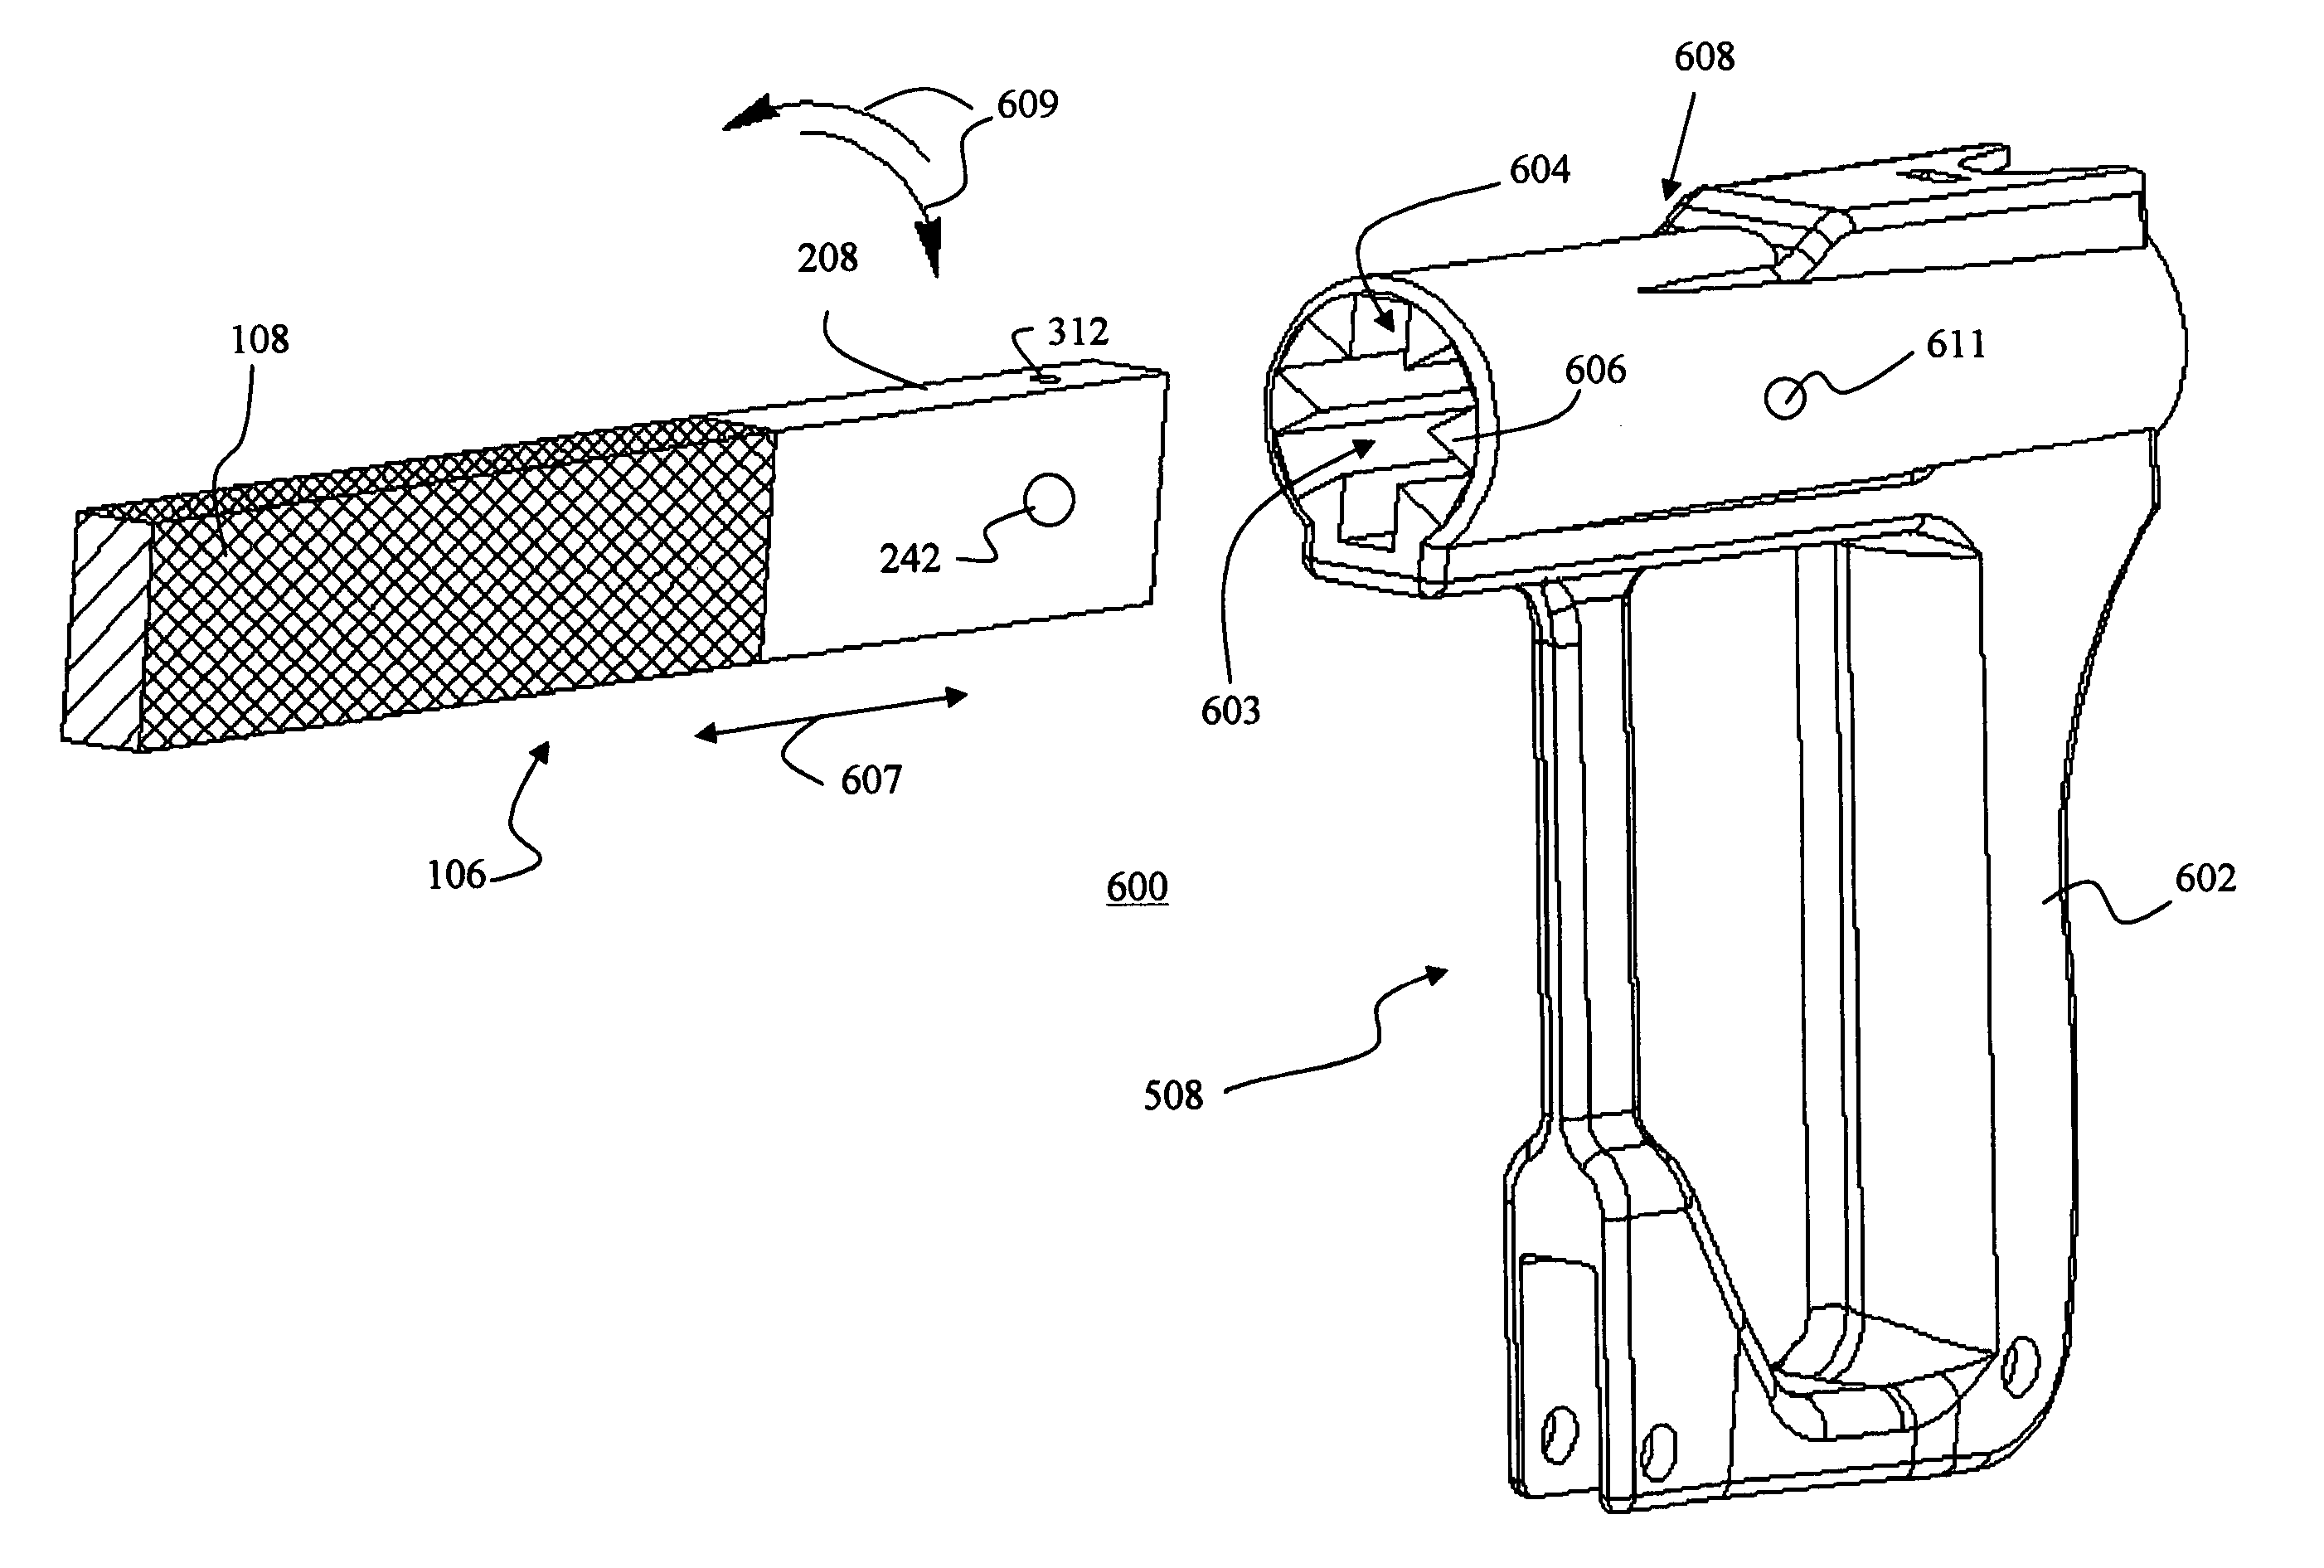 Hacksaw frame having a file as an integral part thereof